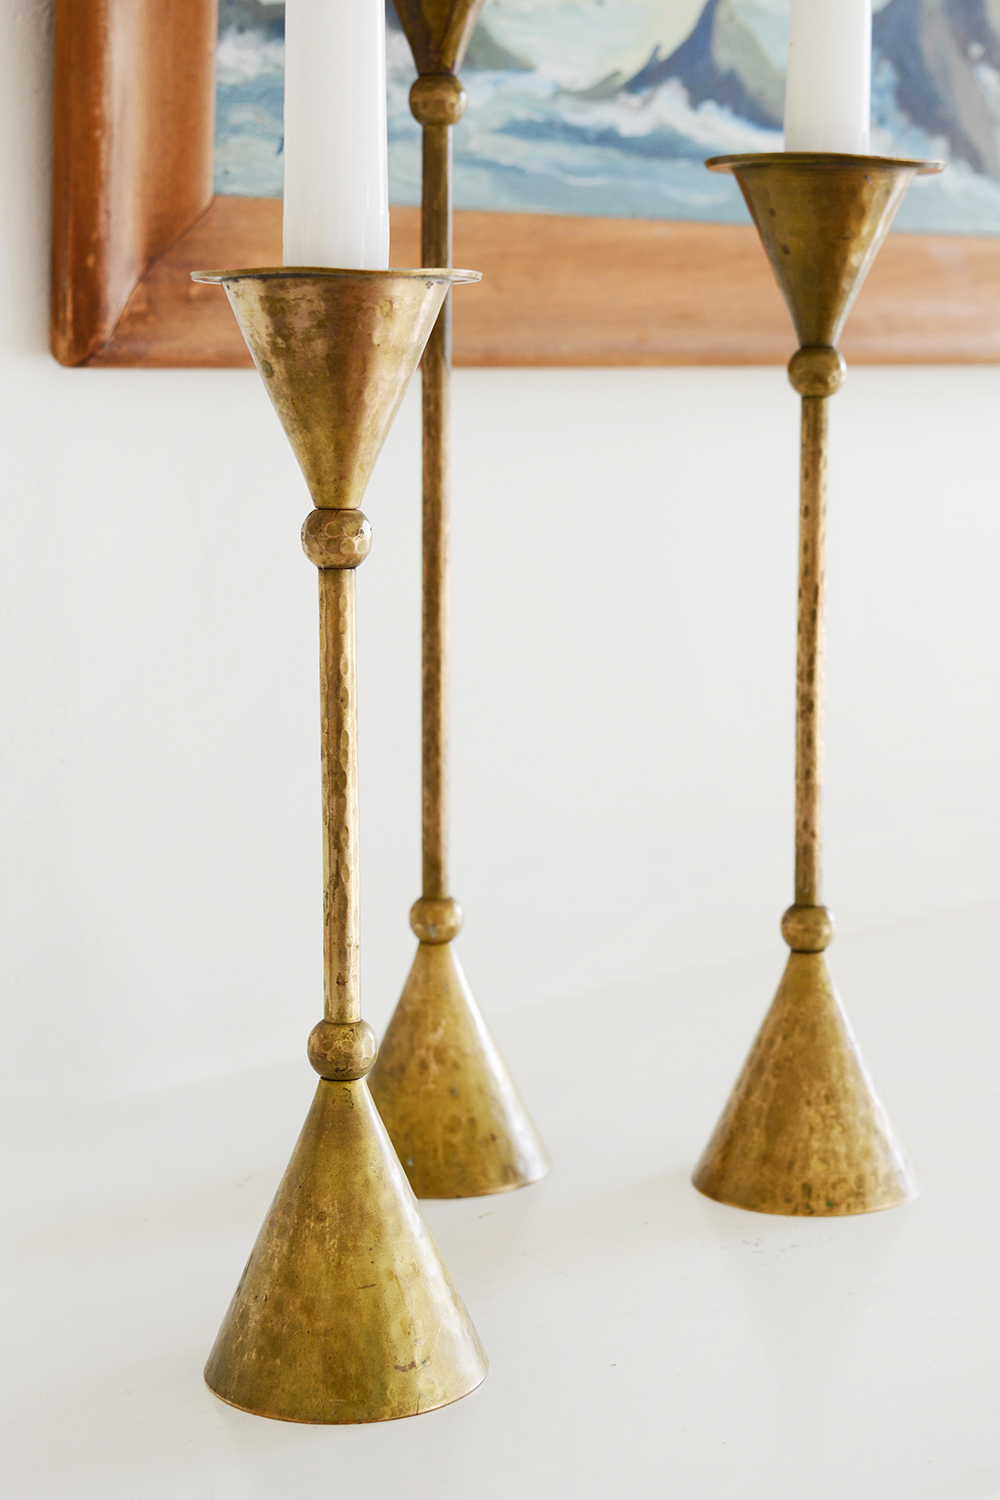 Brass Candle Sticks - thrifted for $3 each!